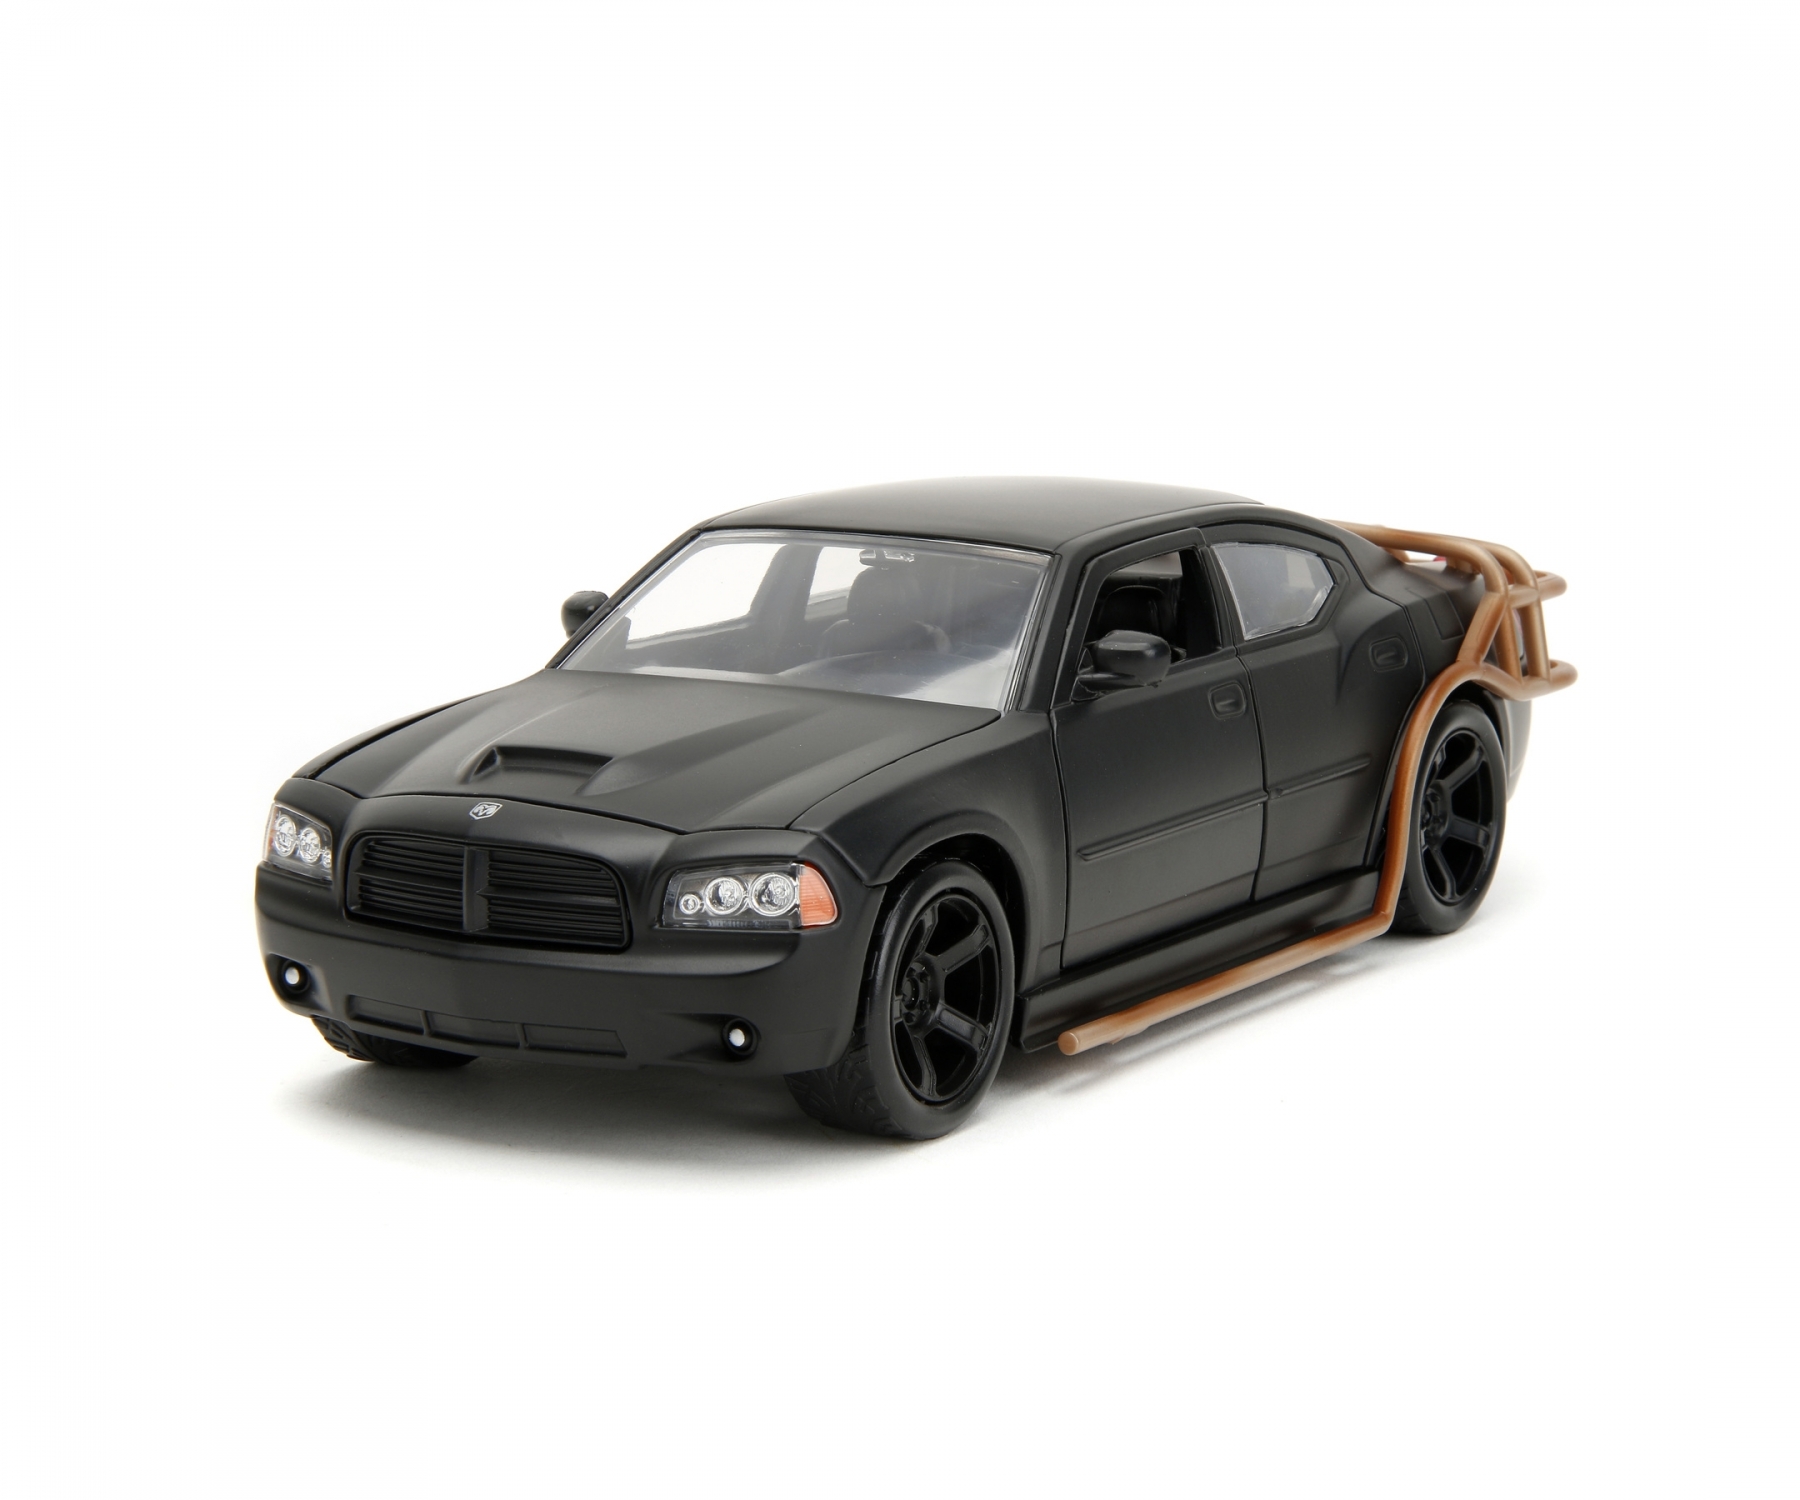 Fast & Furious Dodge Charger Heist Car 1:24